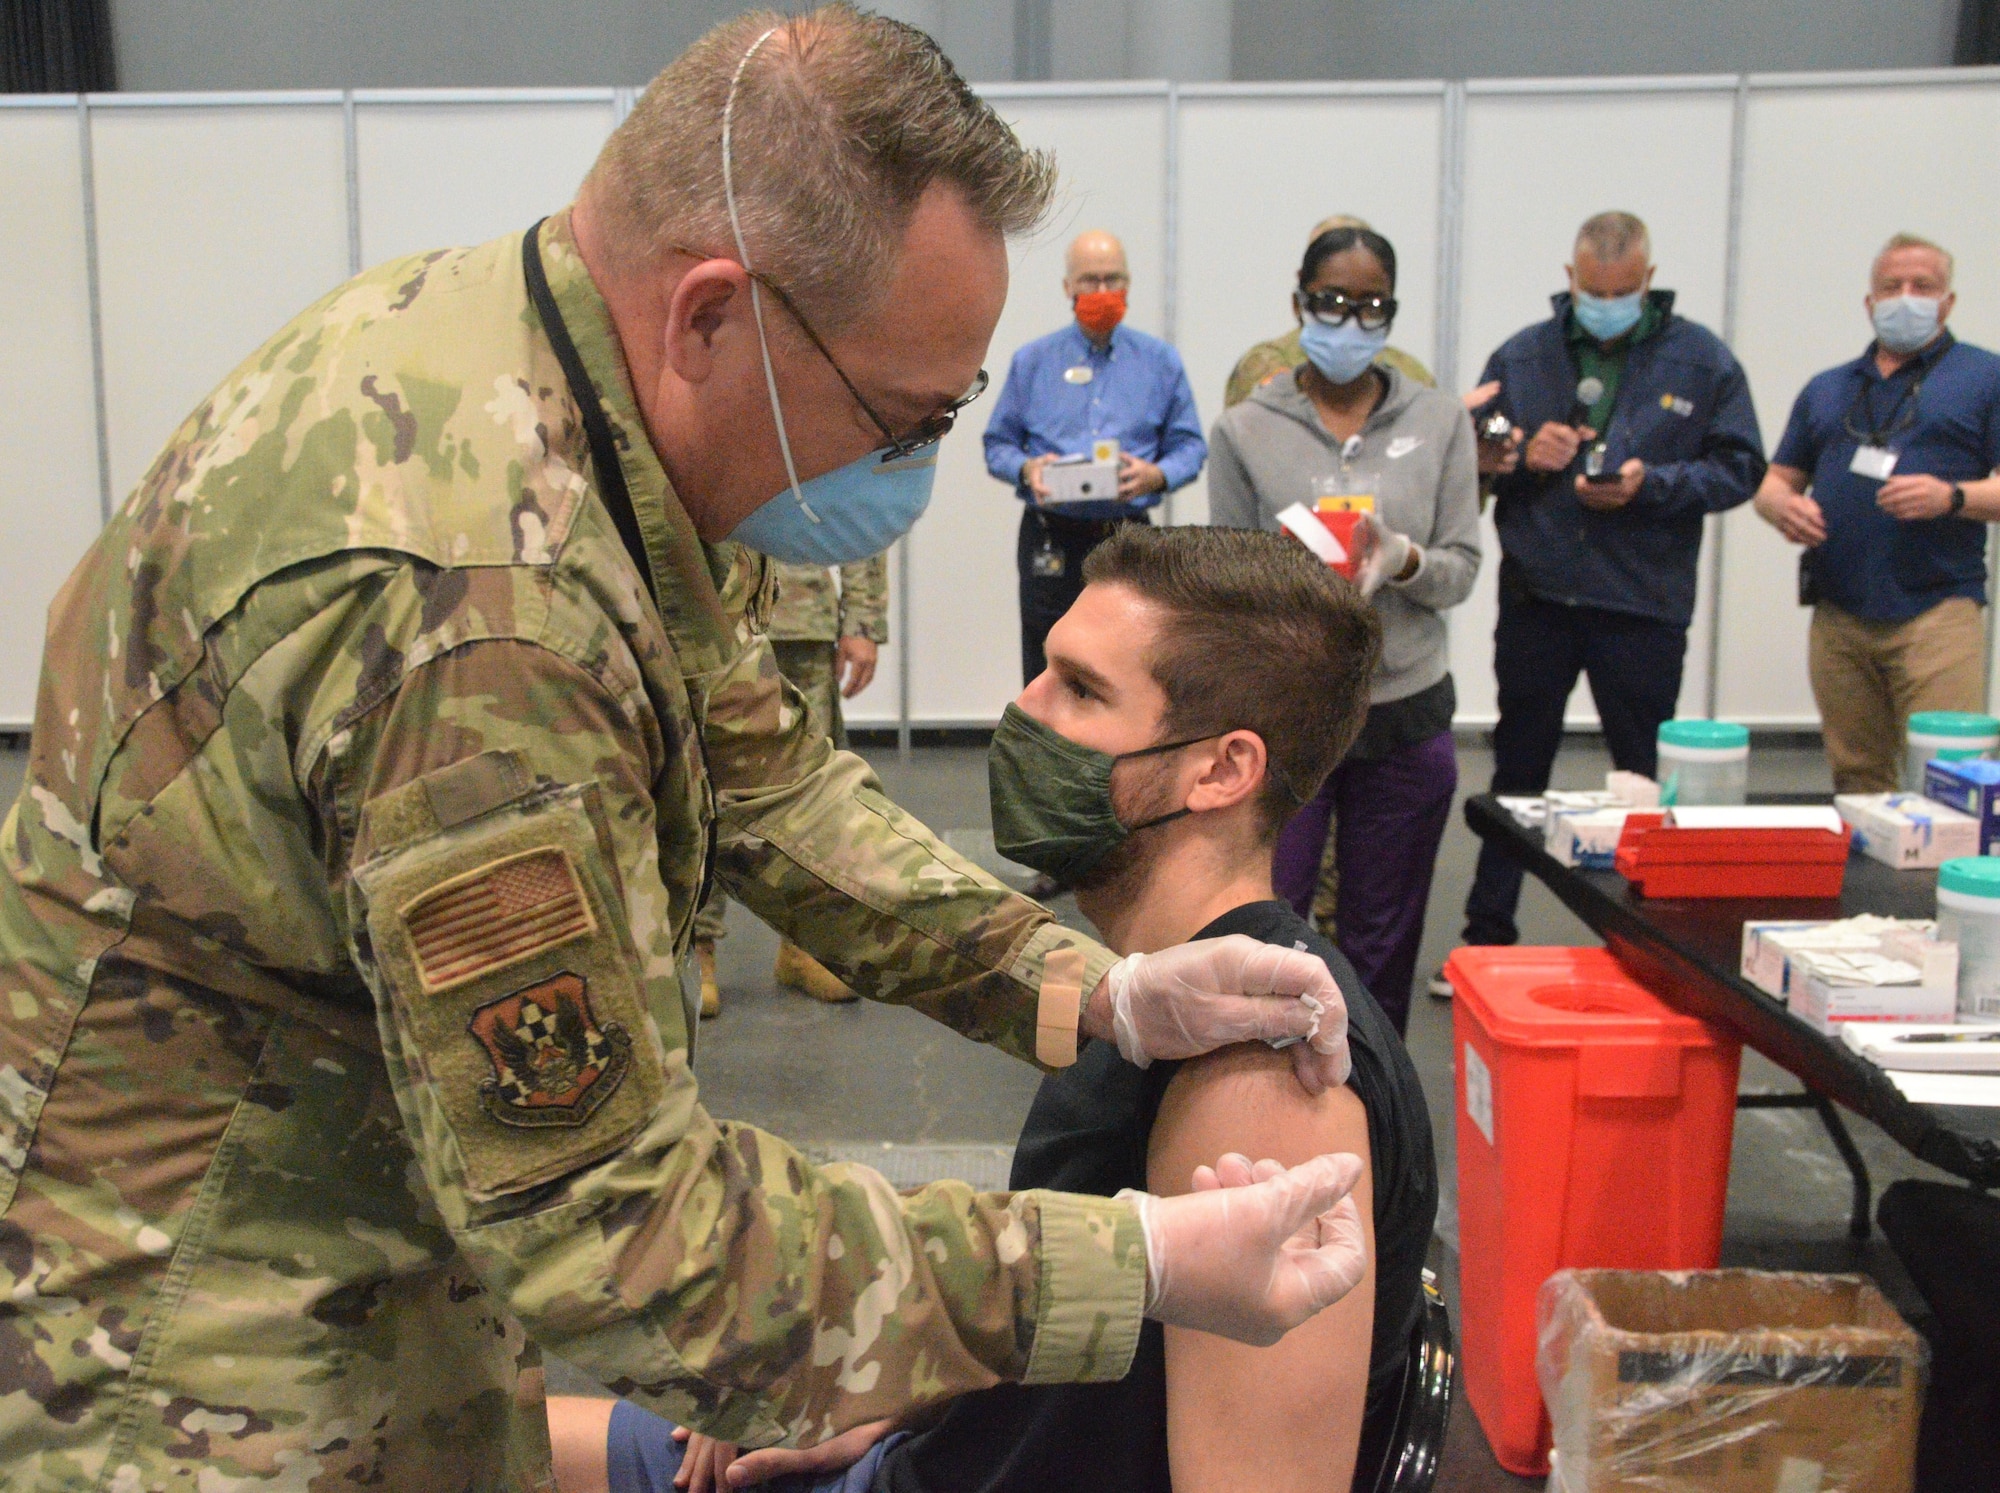 Air Force Lt. Col. John Reynolds, a member of the New York Air National Guard's 105th Airlift Wing, vaccinates Tom Pescatore May 20, 2021 at  the Jacob Javits Convention Center in New York City. Pescatore's injection was the 600,000 shot administered at the massive vaccination site established and staffed by the New York National Guard.